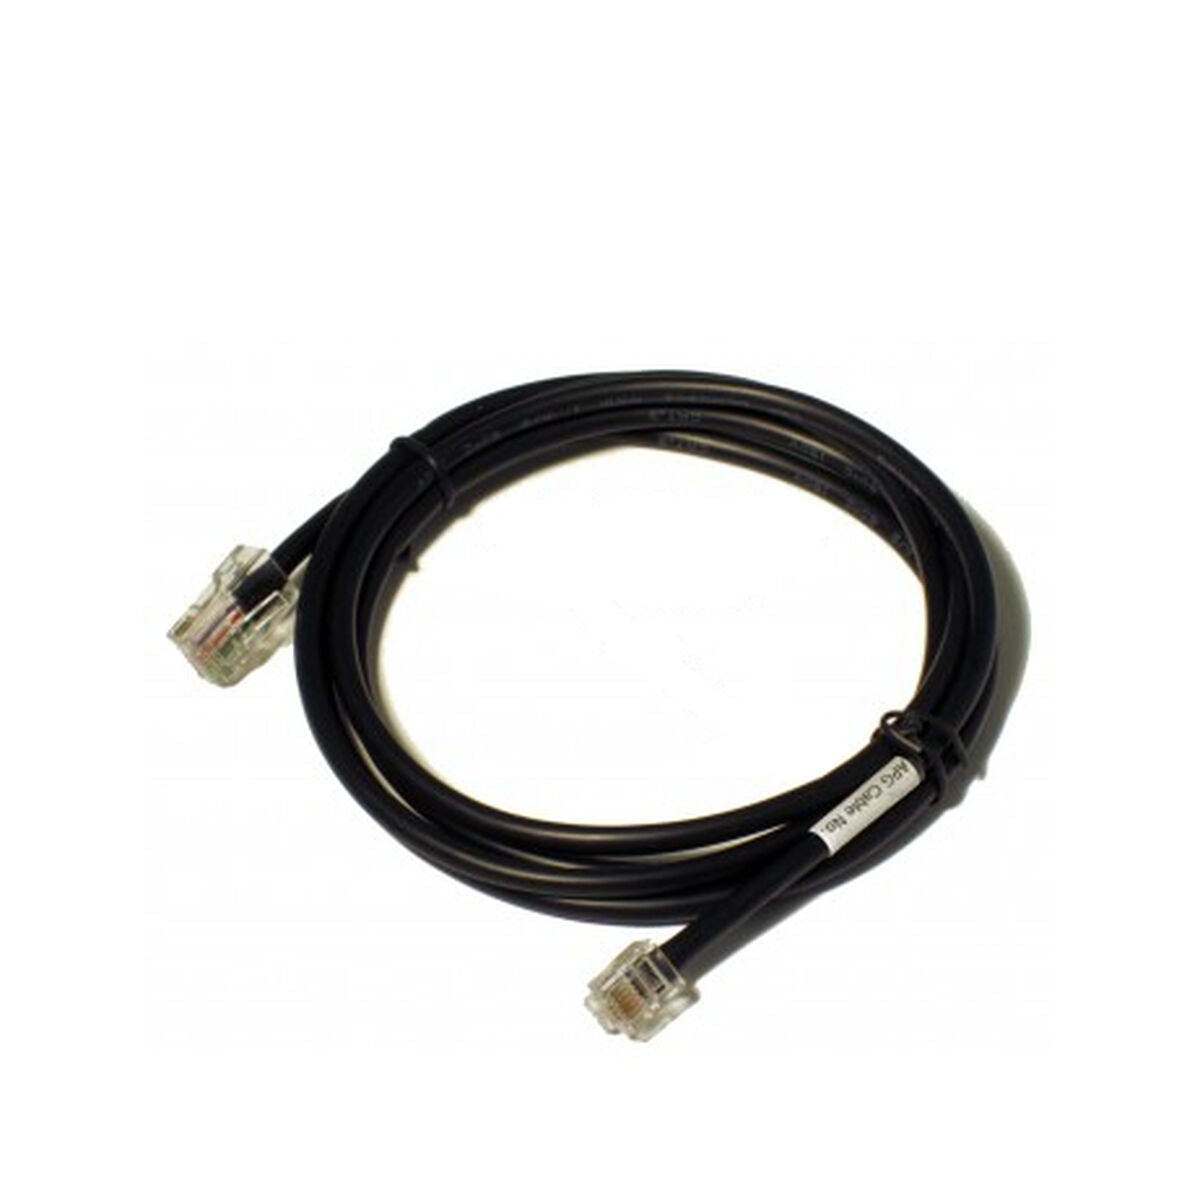 Cable APG, APG, DIY and tools, Building supplies, cable-apg, Brand_APG, category-reference-2609, category-reference-2642, category-reference-2645, category-reference-t-17535, category-reference-t-19651, category-reference-t-19827, category-reference-t-21110, computers / peripherals, Condition_NEW, ferretería, office, Price_20 - 50, RiotNook